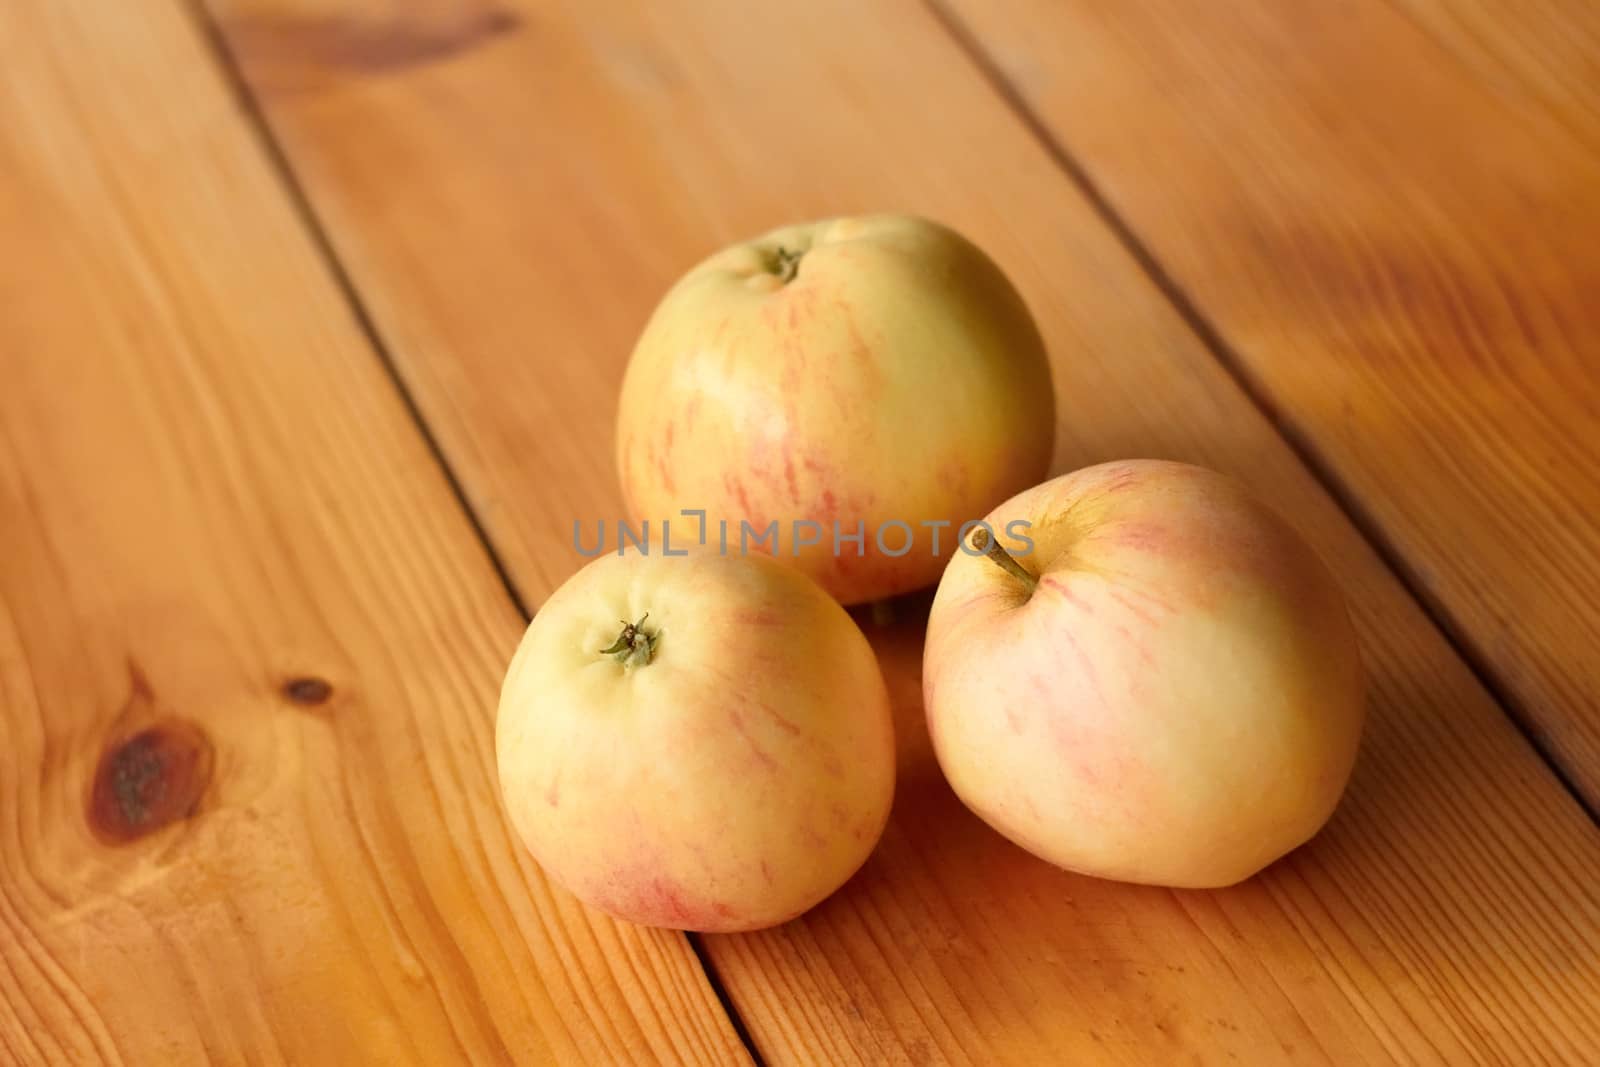 Ripe apples on a wooden table by qiiip